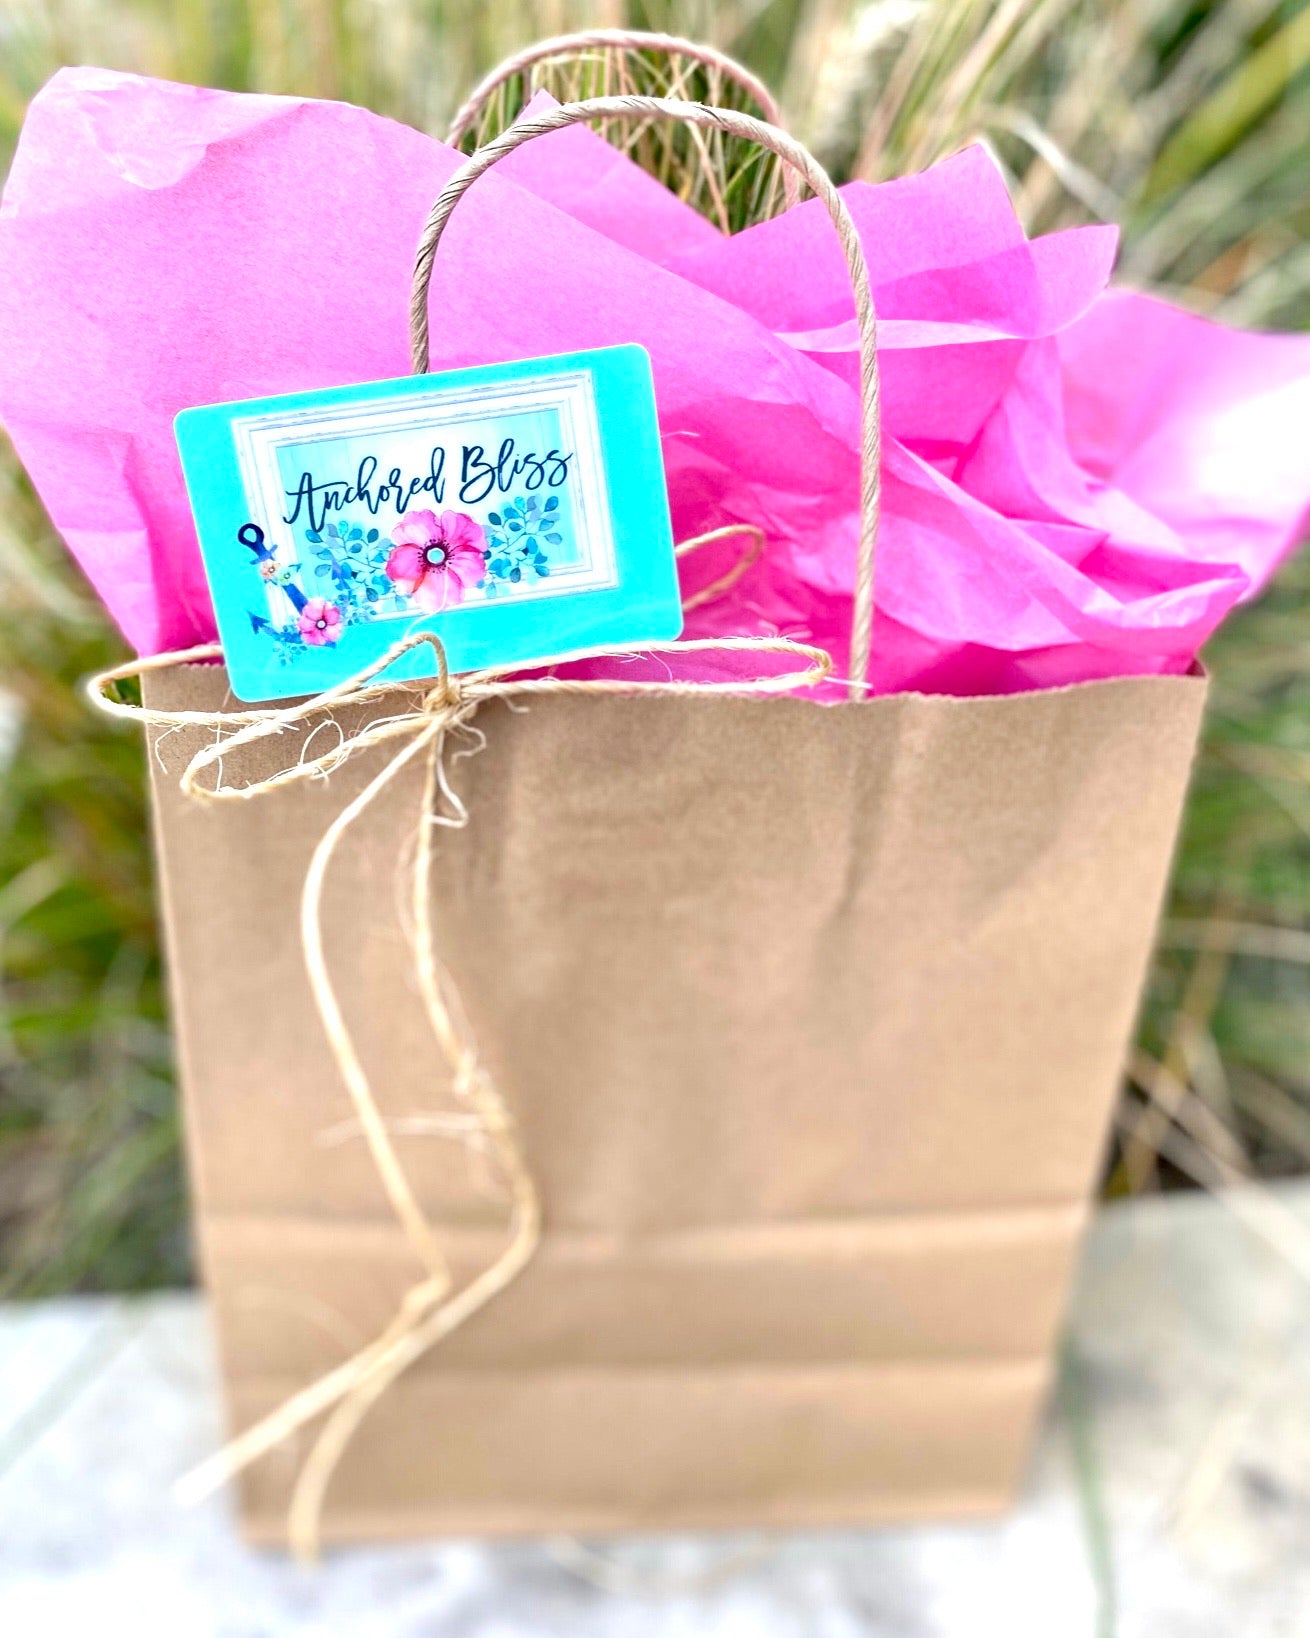 Anchored Bliss Gift Card-Anchored Bliss Boutique-Shop Anchored Bliss Women's Boutique Clothing Store